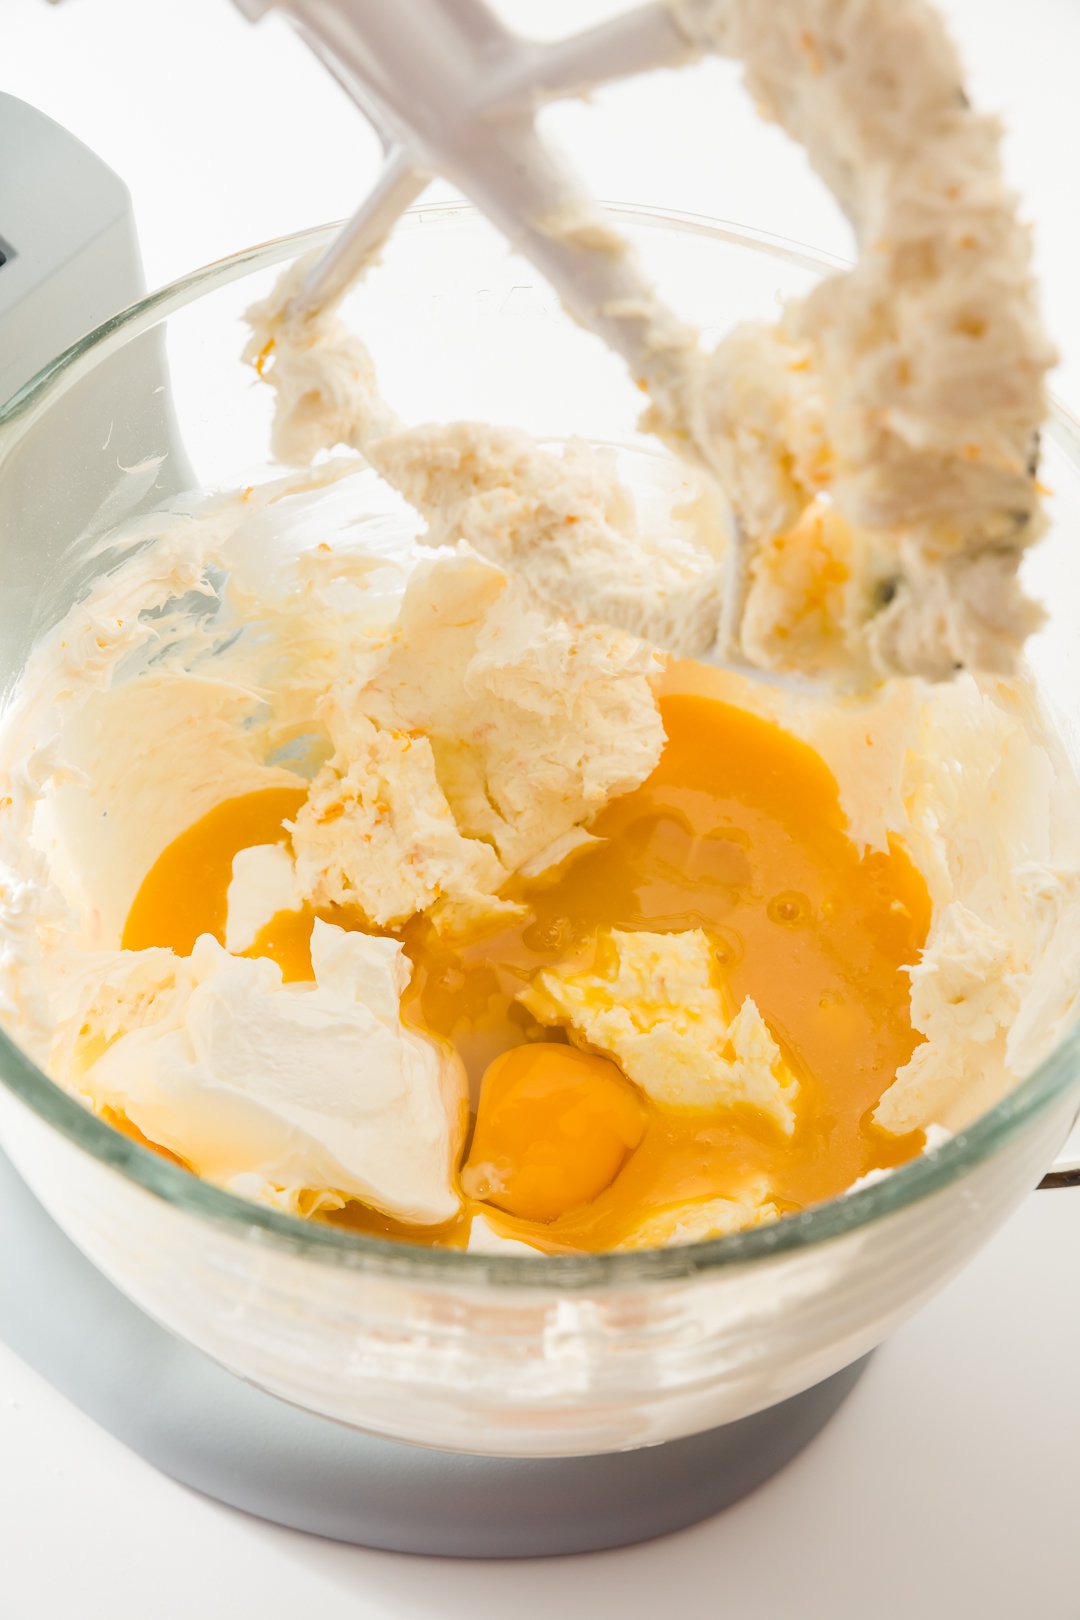 Mixing orange concentrate and sour cream into cheesecake batter